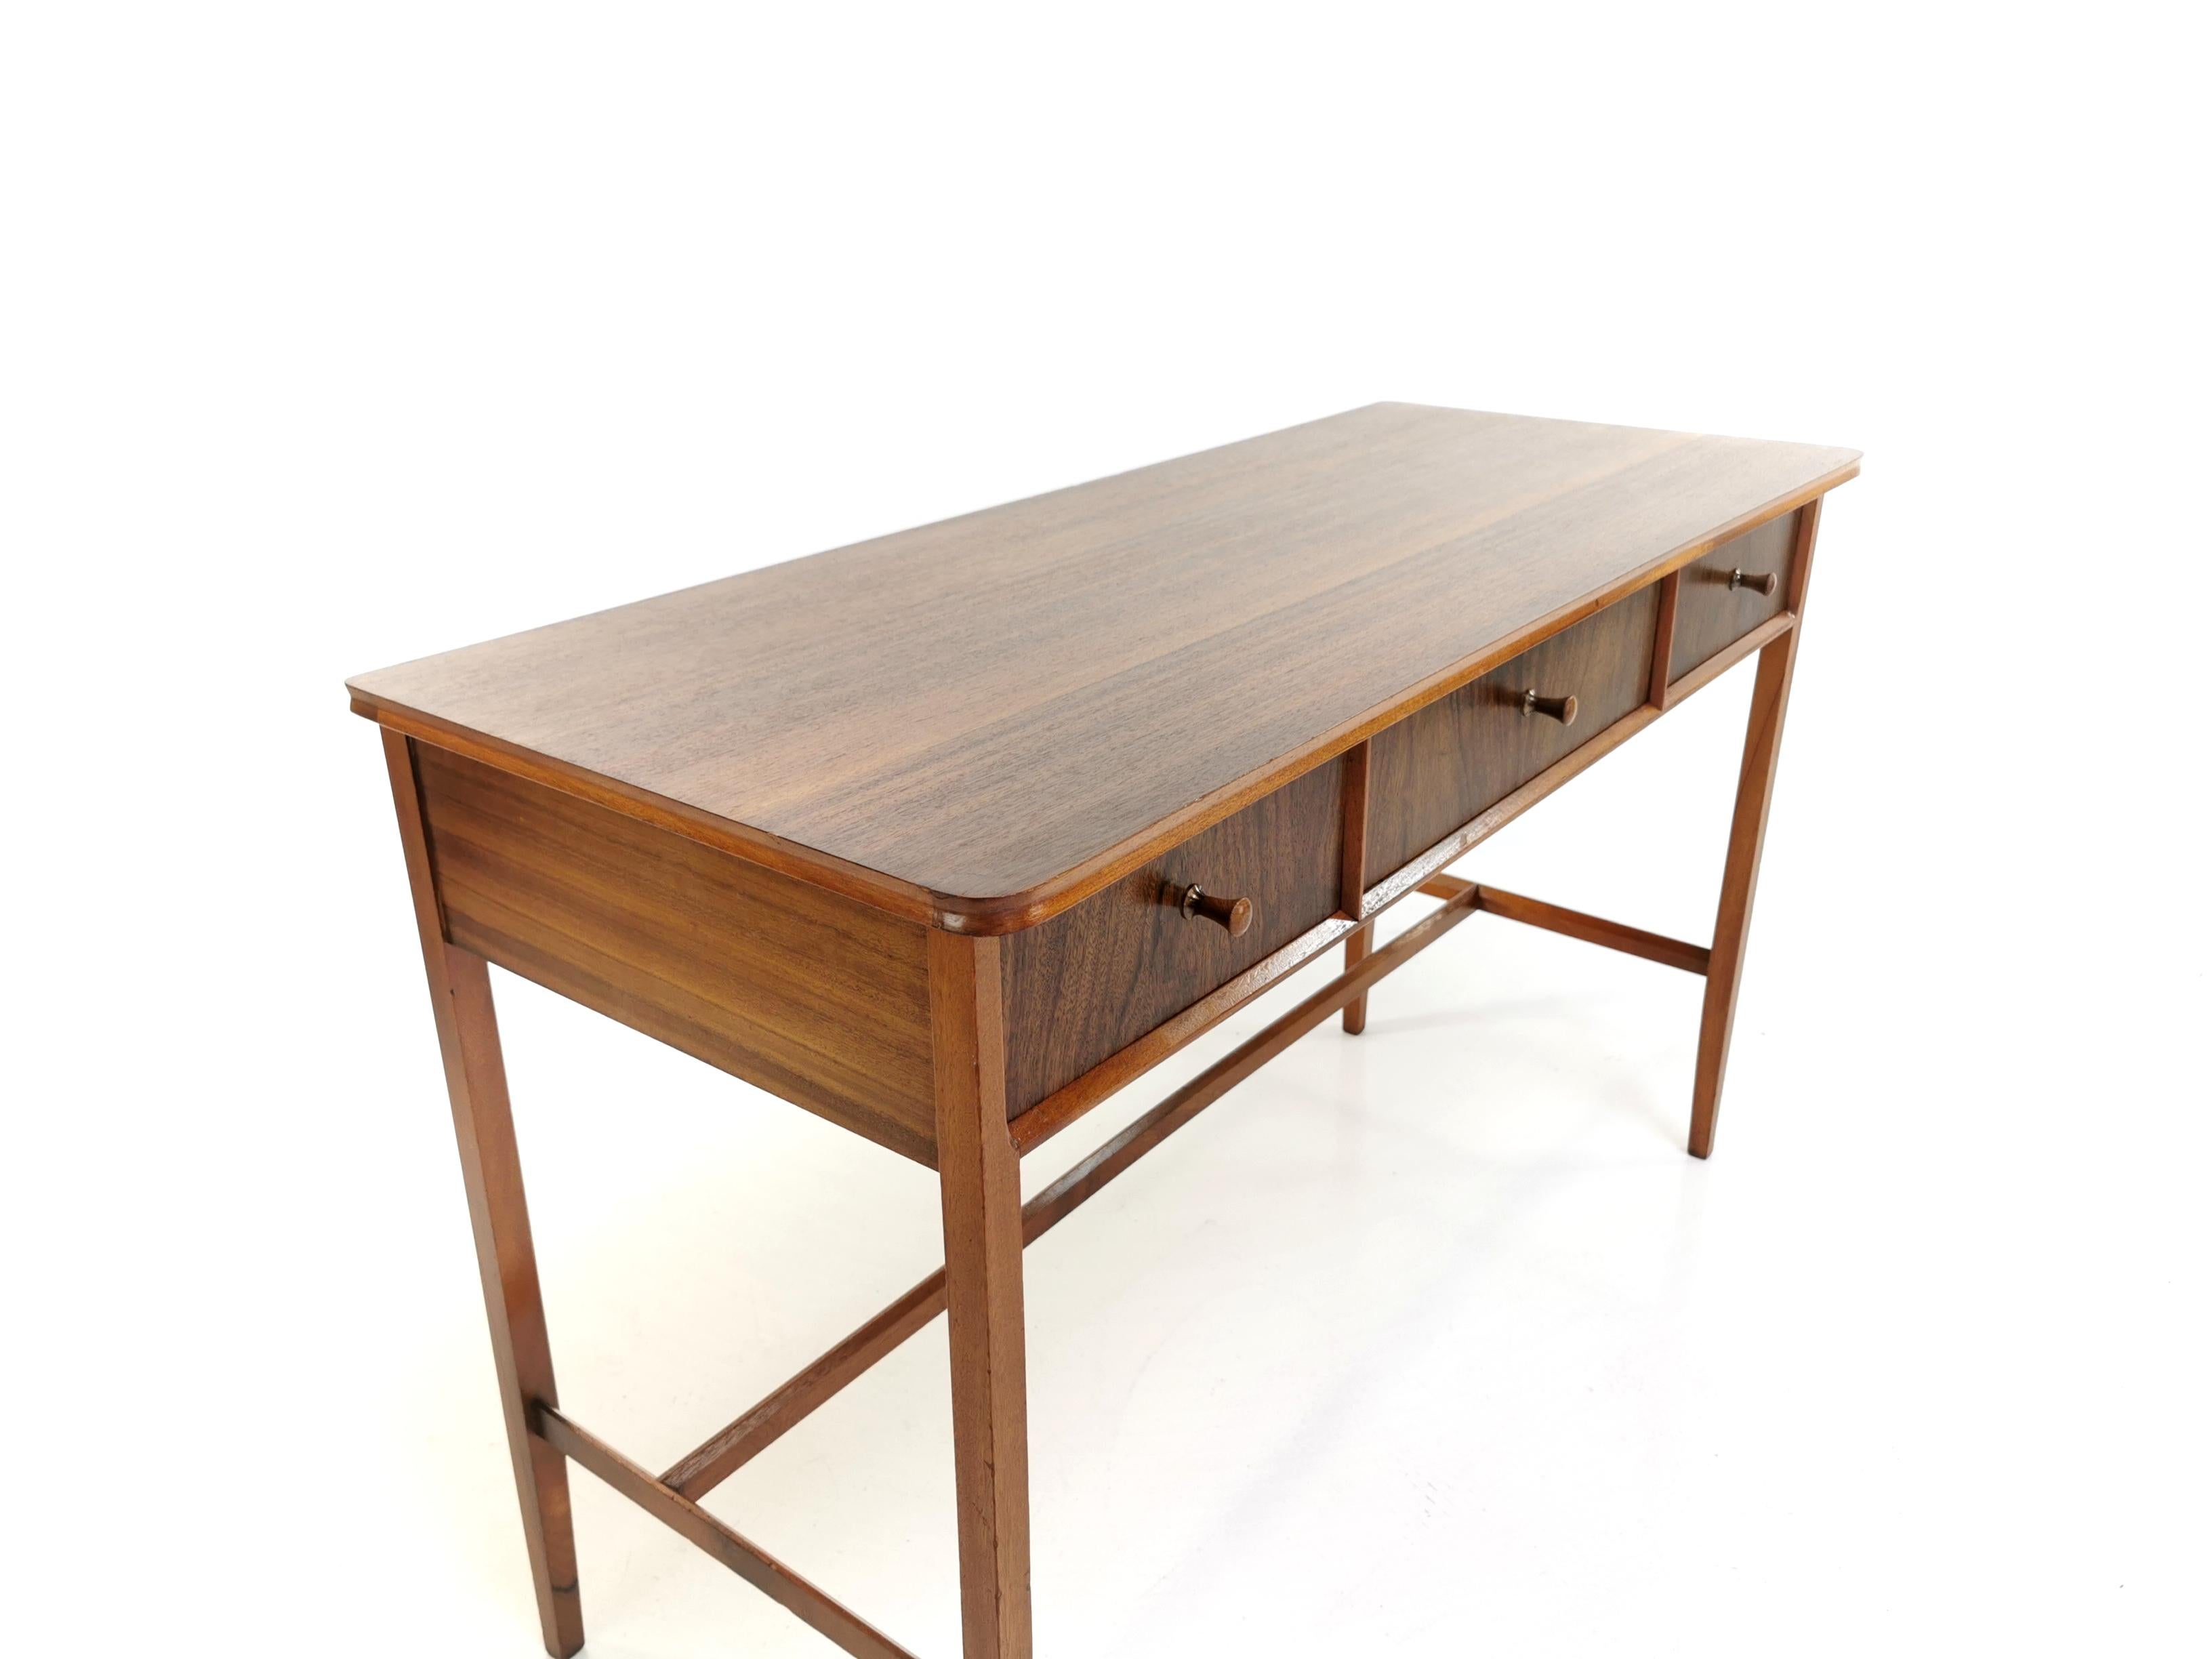 Walnut writing desk 

A Vanson console table / writing desk, which was most likely designed by Peter Hayward. Vanson retailed at Heals and the like. 

Comes in walnut and features three drawers with turned knobs.

circa 1960s.